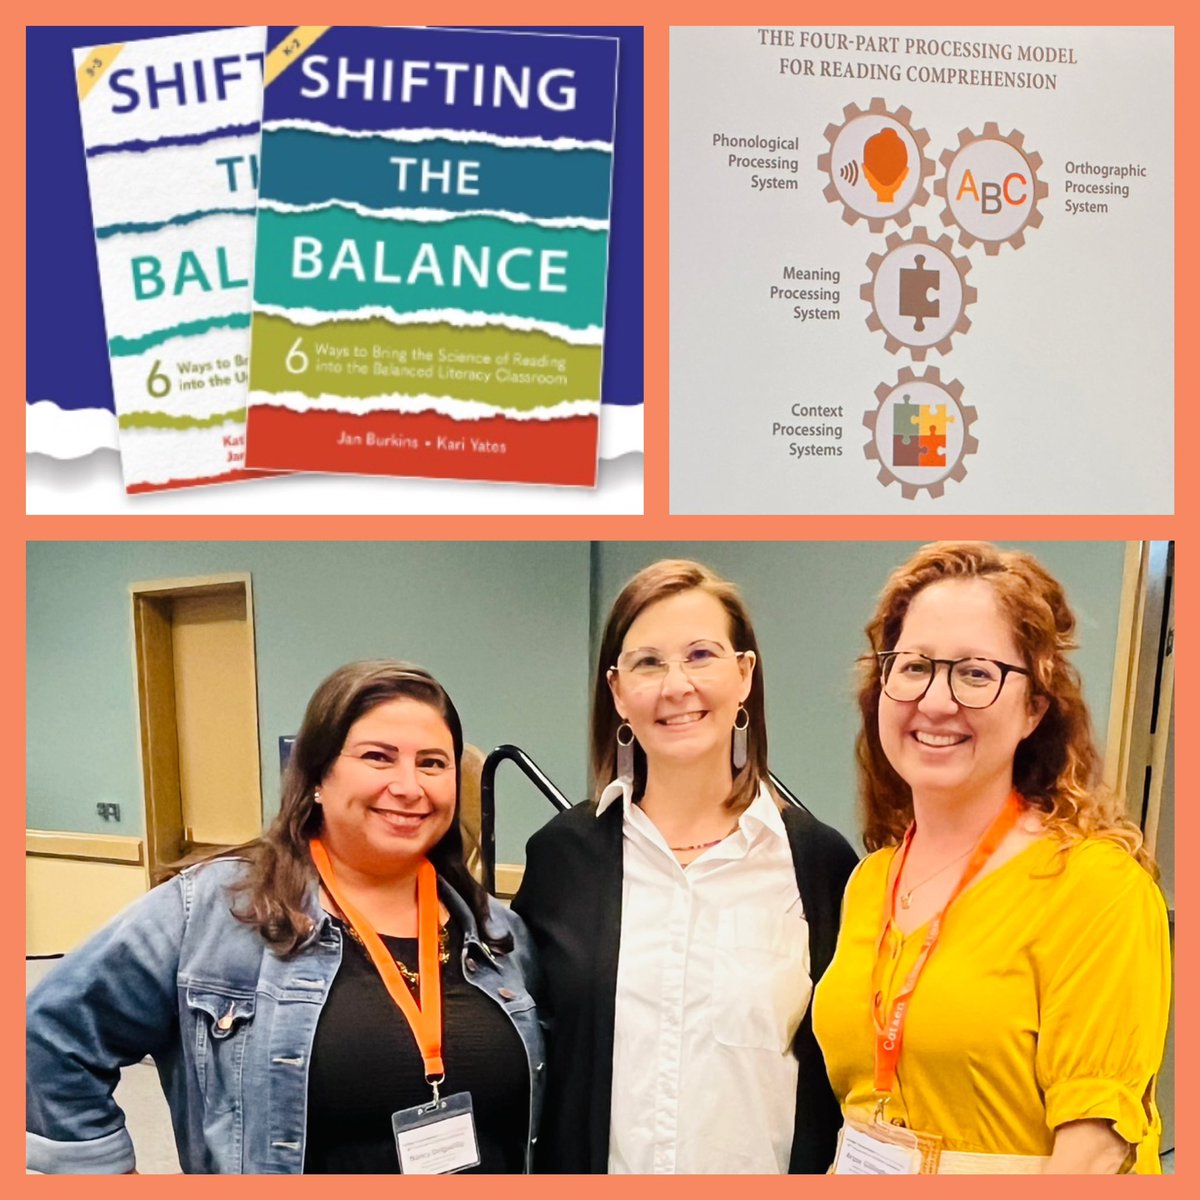 Thanks @CotsenAoT for your continued support and annual conference. Learning from Dr. Jan Burkins was the highlight of my day. I loved reconnecting with dear friends who are passionate about teaching and learning.